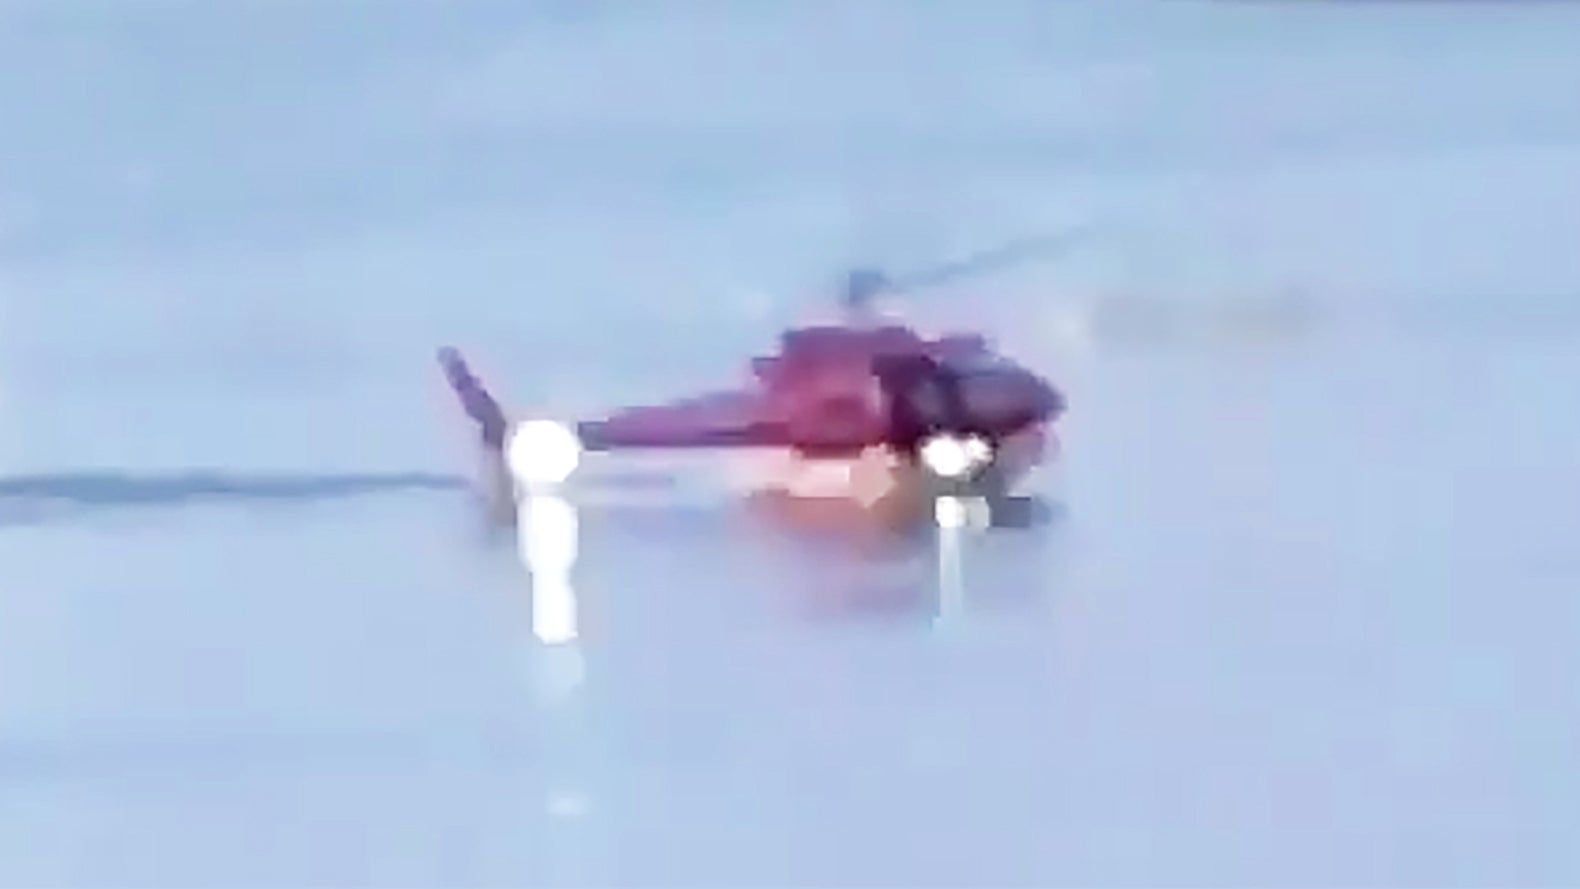 Video Emerges Of Helicopter Crashing Into New York’s East River (Updated)